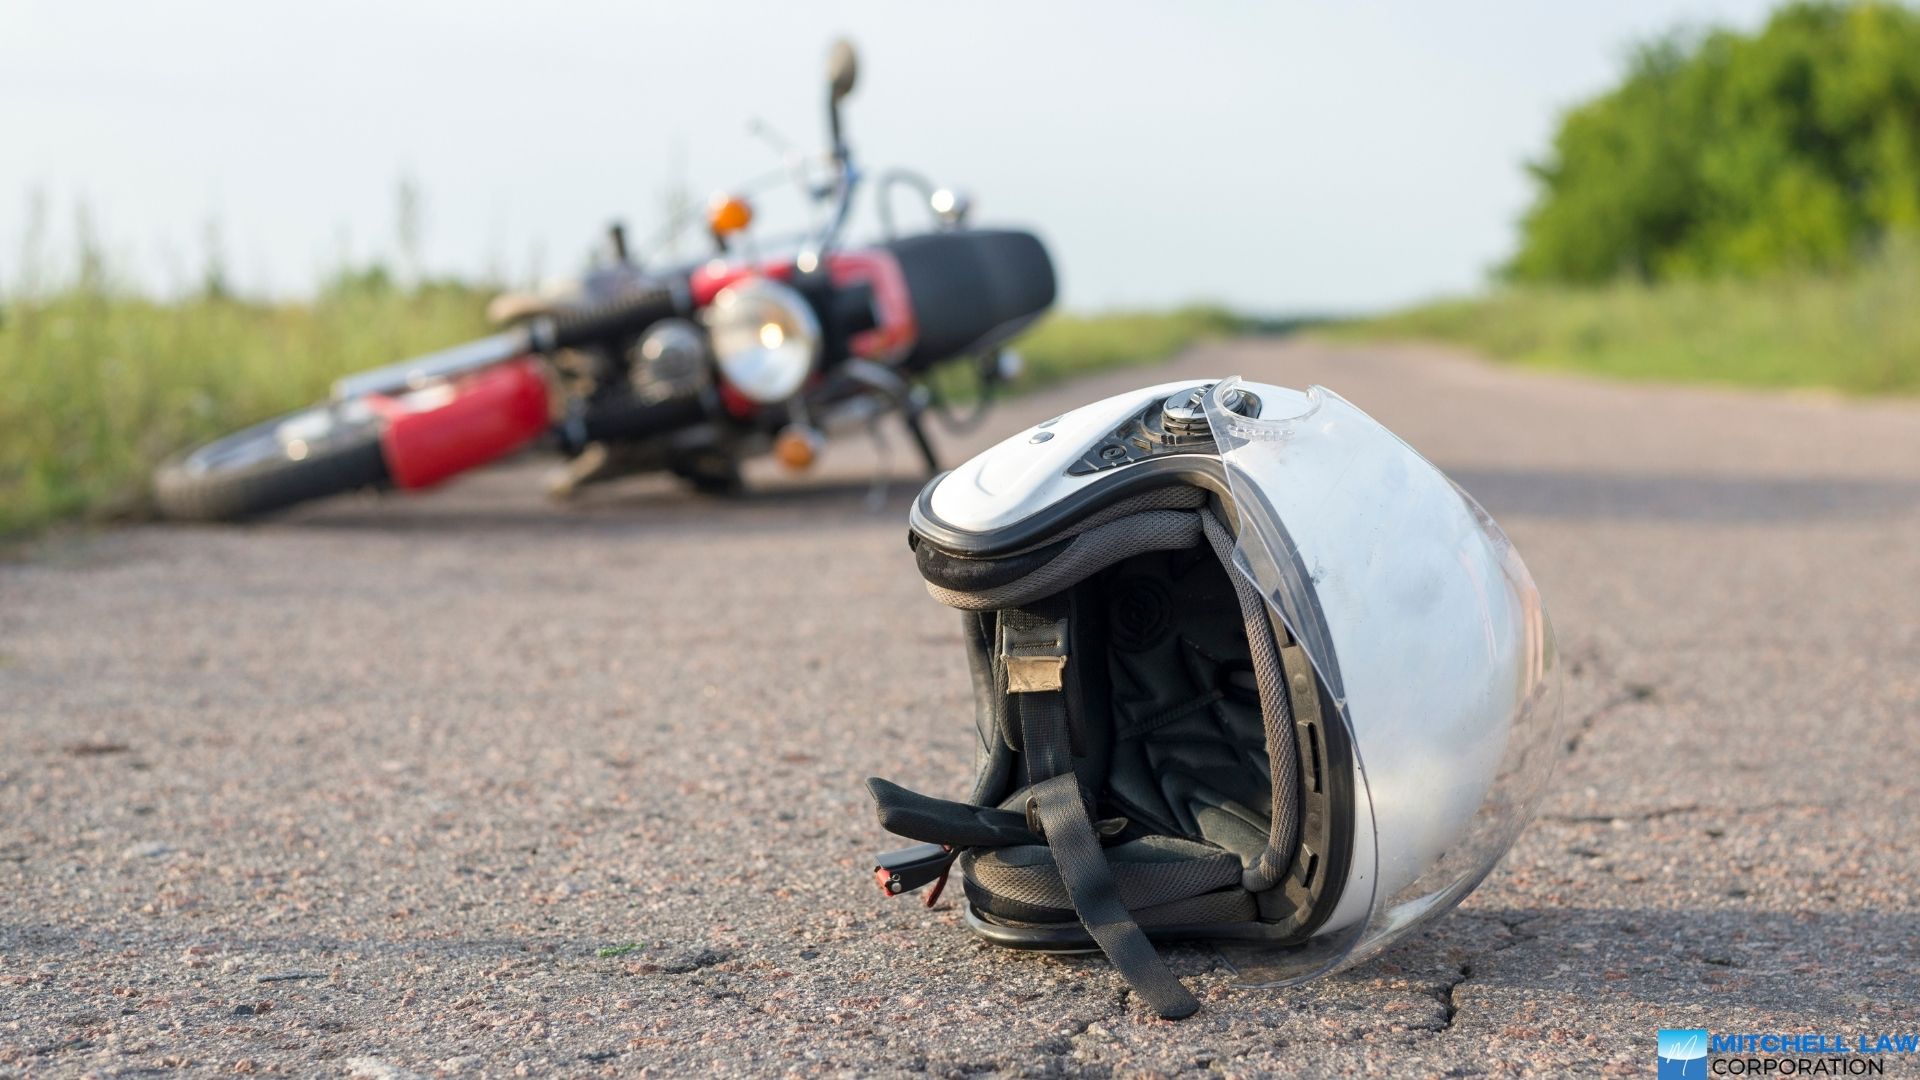 San Diego Motorcycle Accident Lawyer